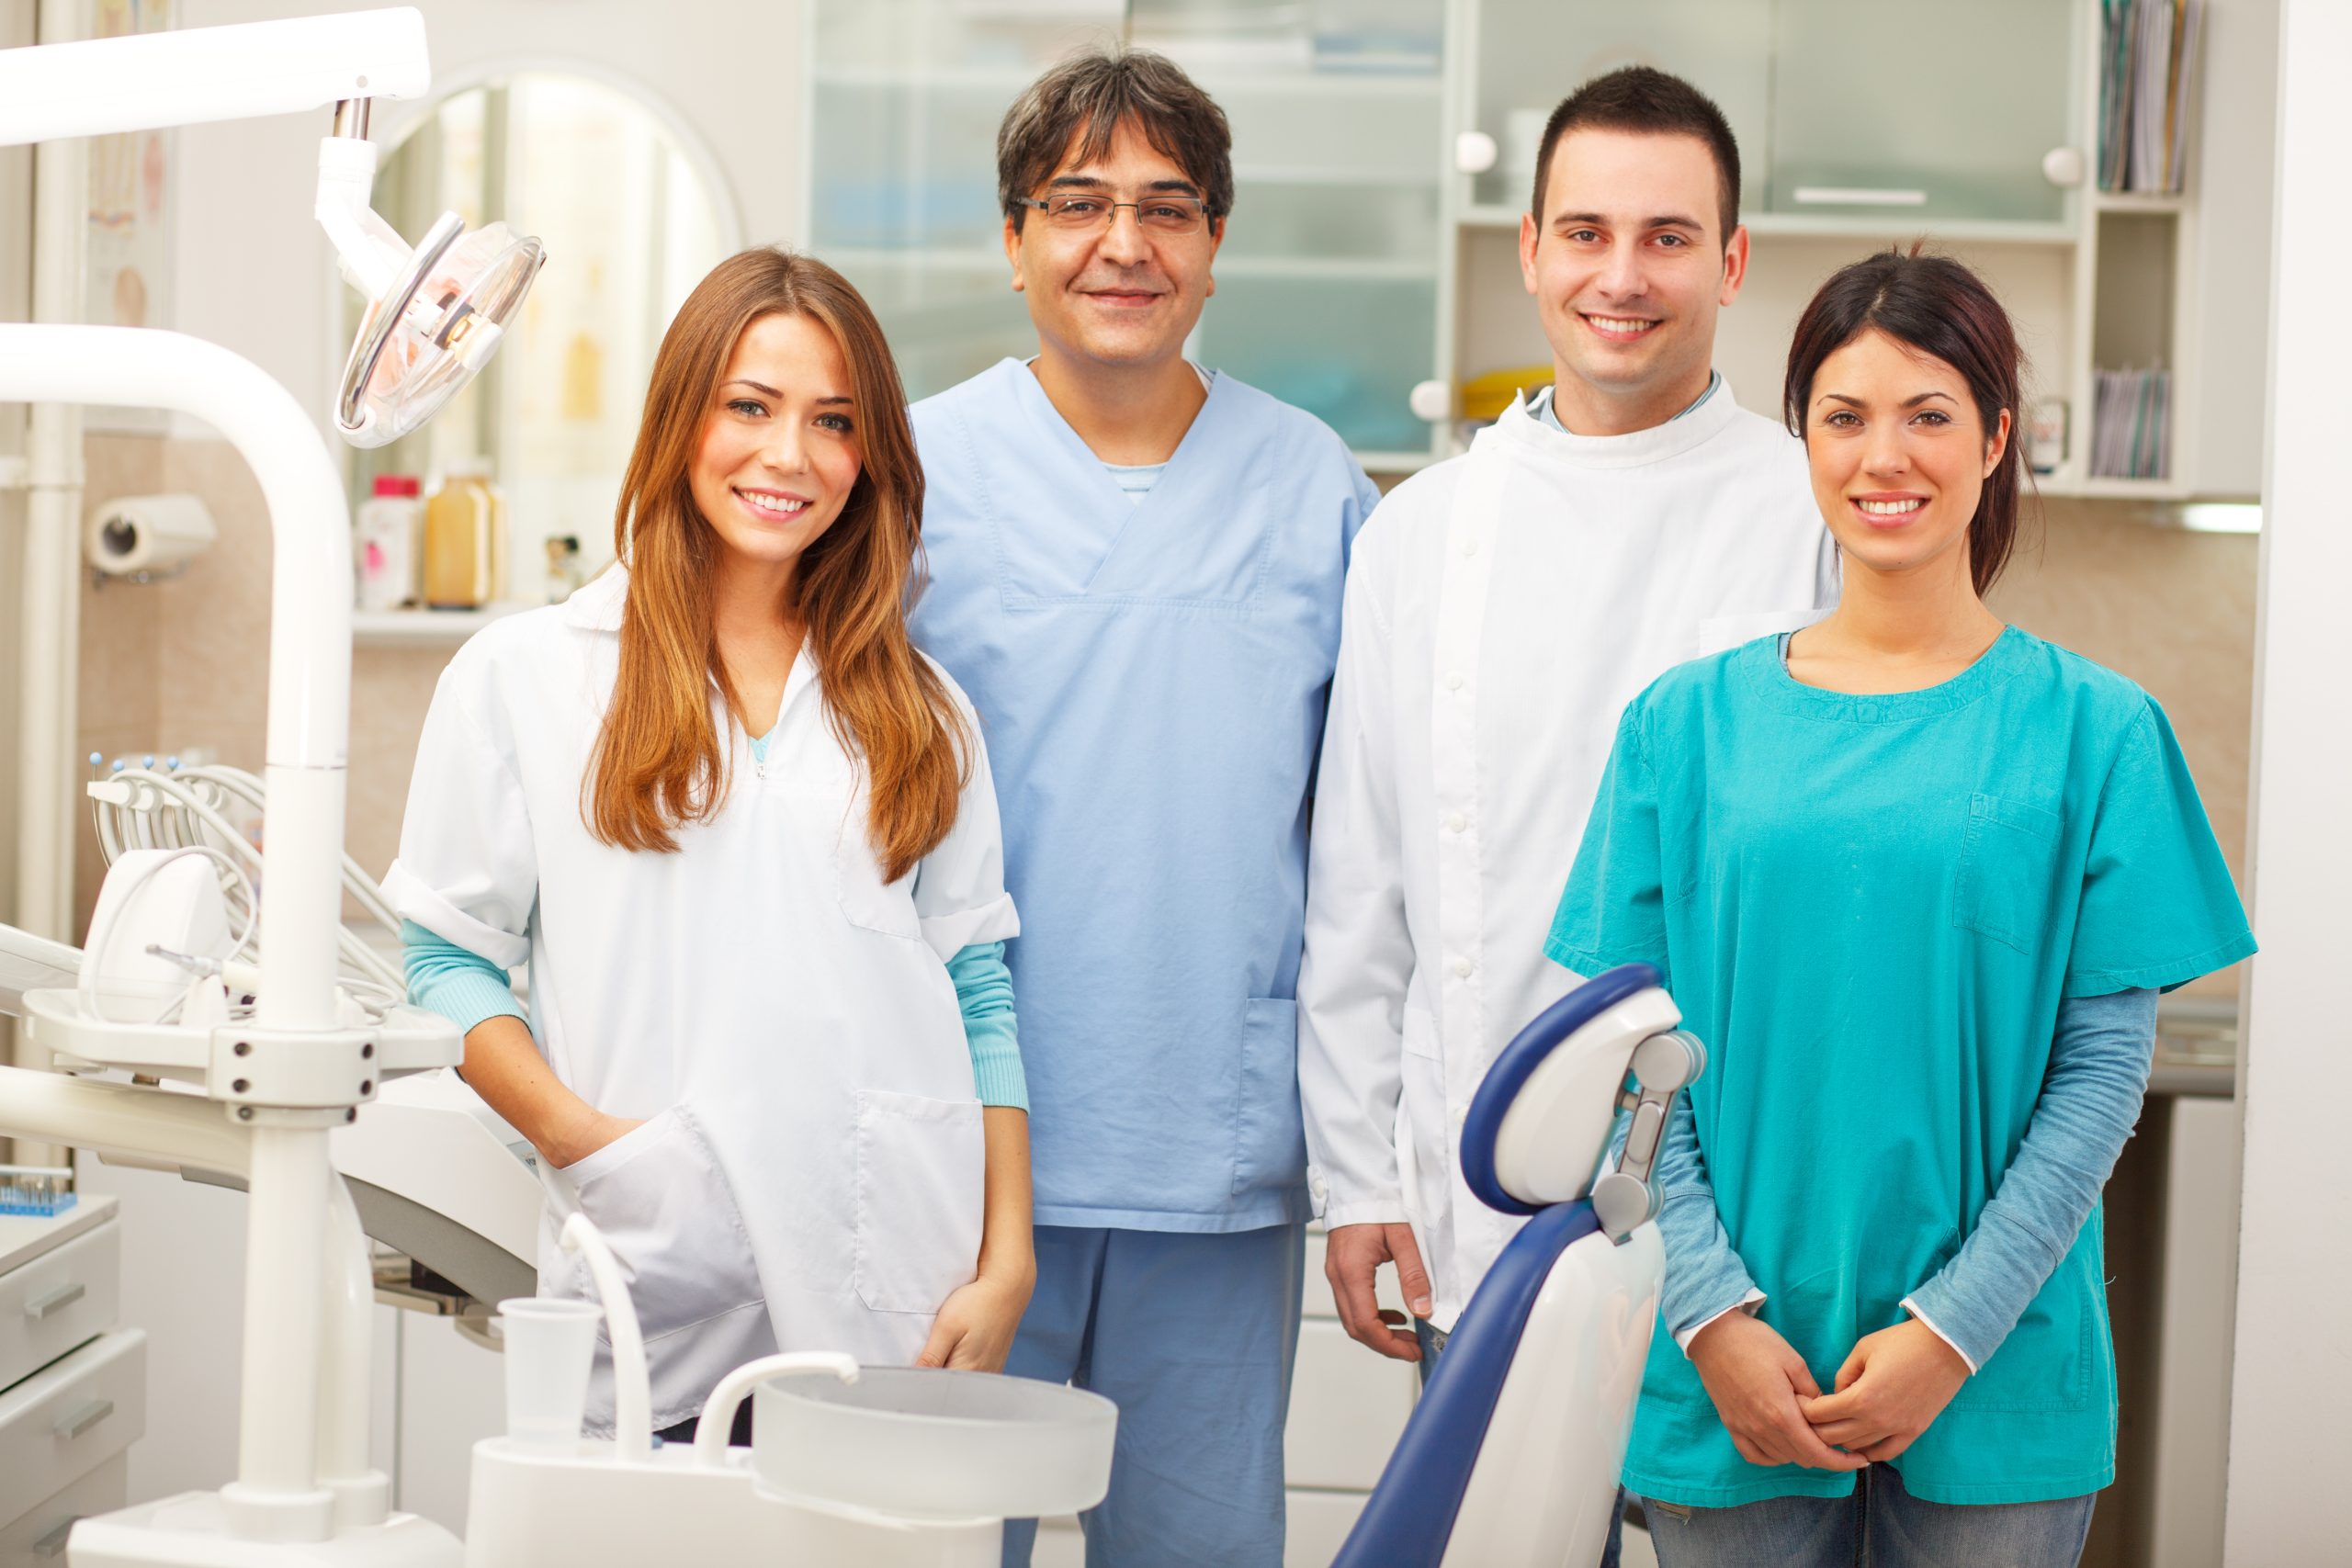 Group,Of,Dentists,Standing,In,Their,Office,And,Looking,At